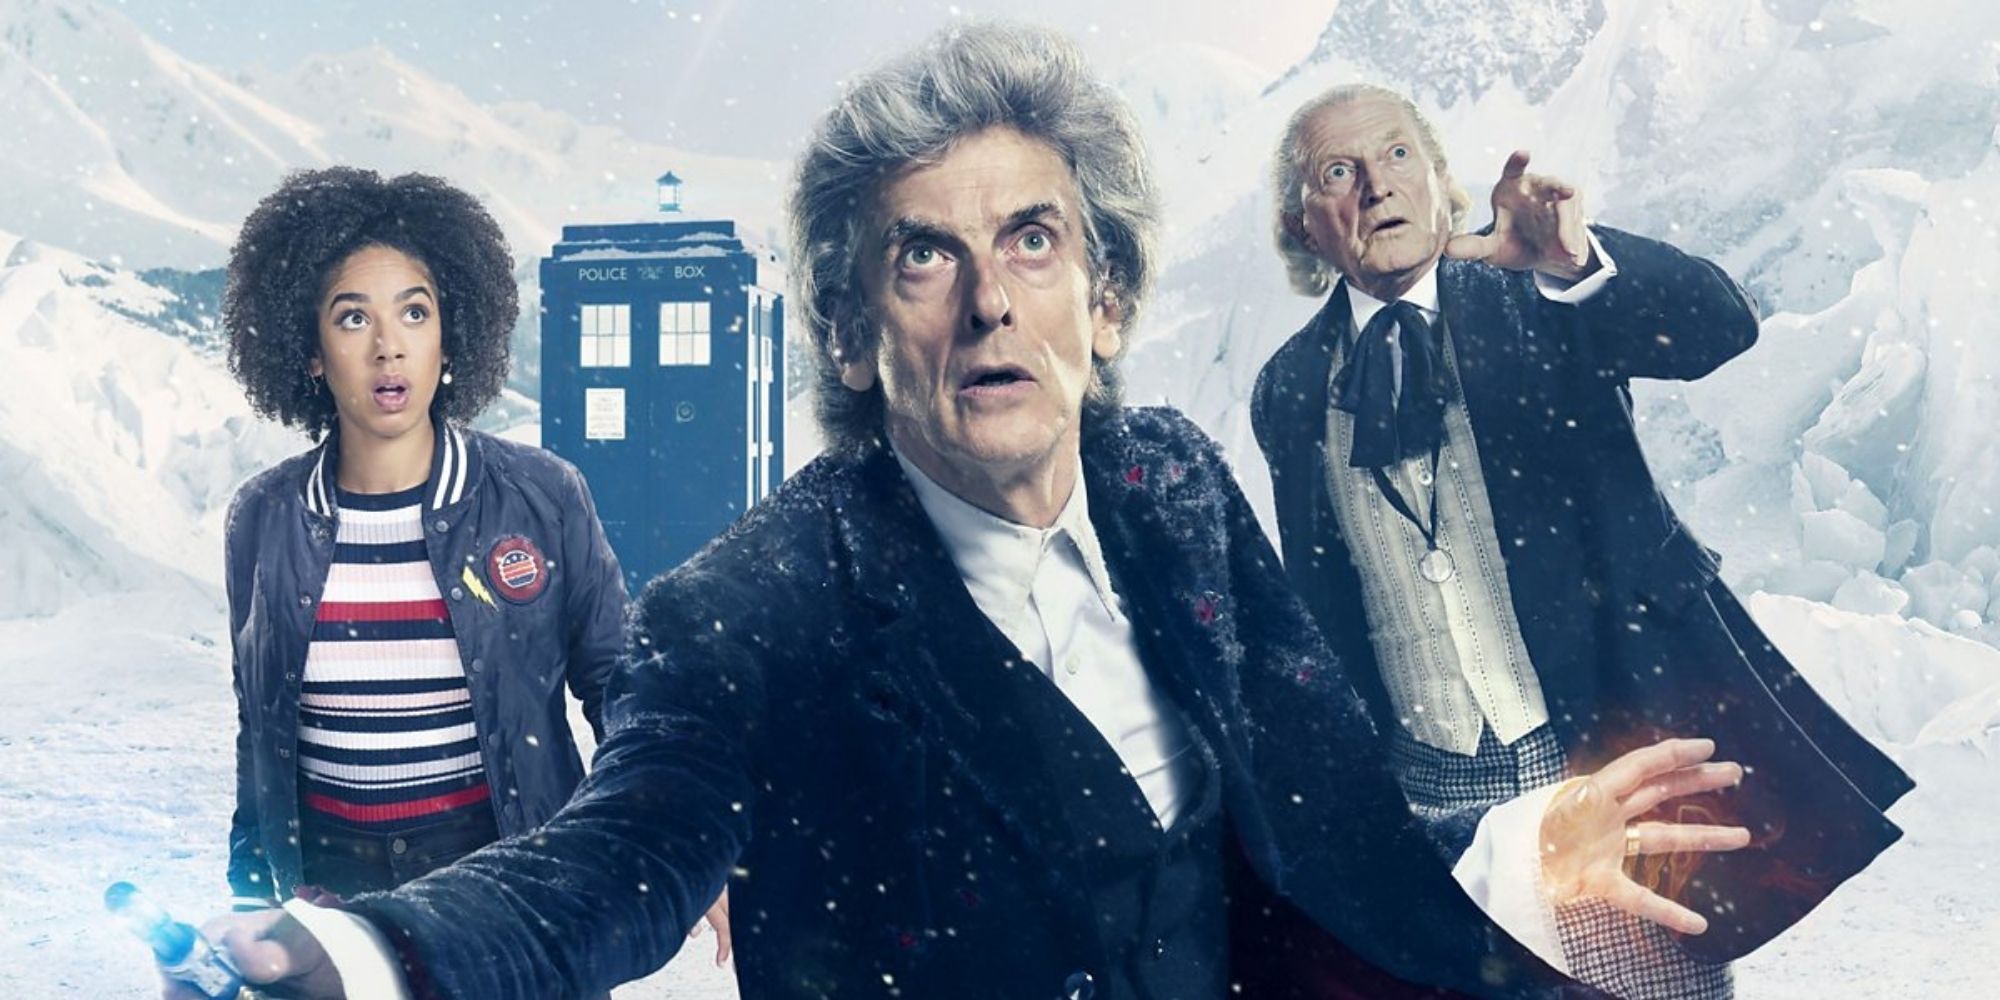 Screenshot of the episode Twice Upon a Time from the TV show Doctor Who.